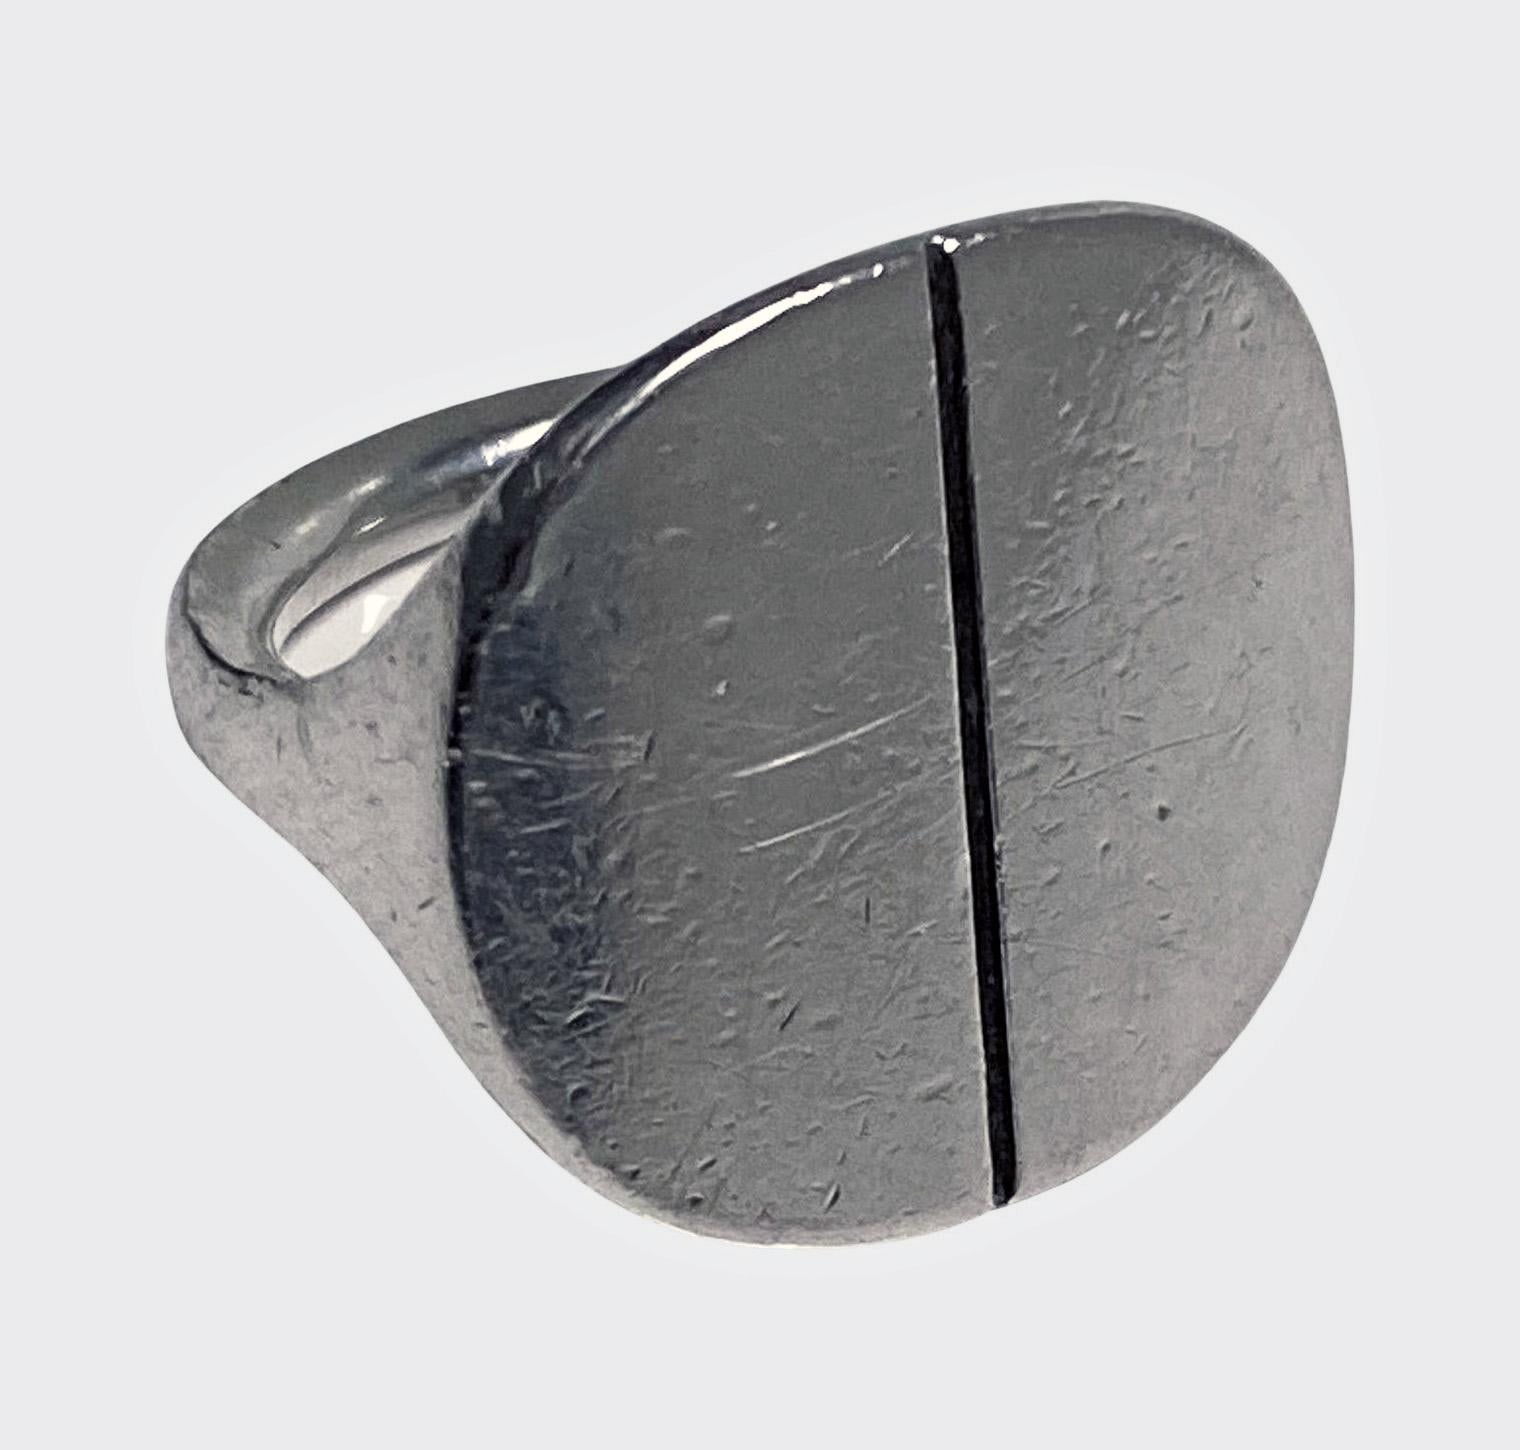 Georg Jensen Sterling Silver No 101 Ring Denmark C.1970. Full Georg Jensen Hallmarks. Size 7. Item Weight:9.65 grams. Top measures: 7/8 x 3.4 inches. Lovely mellow patina. 